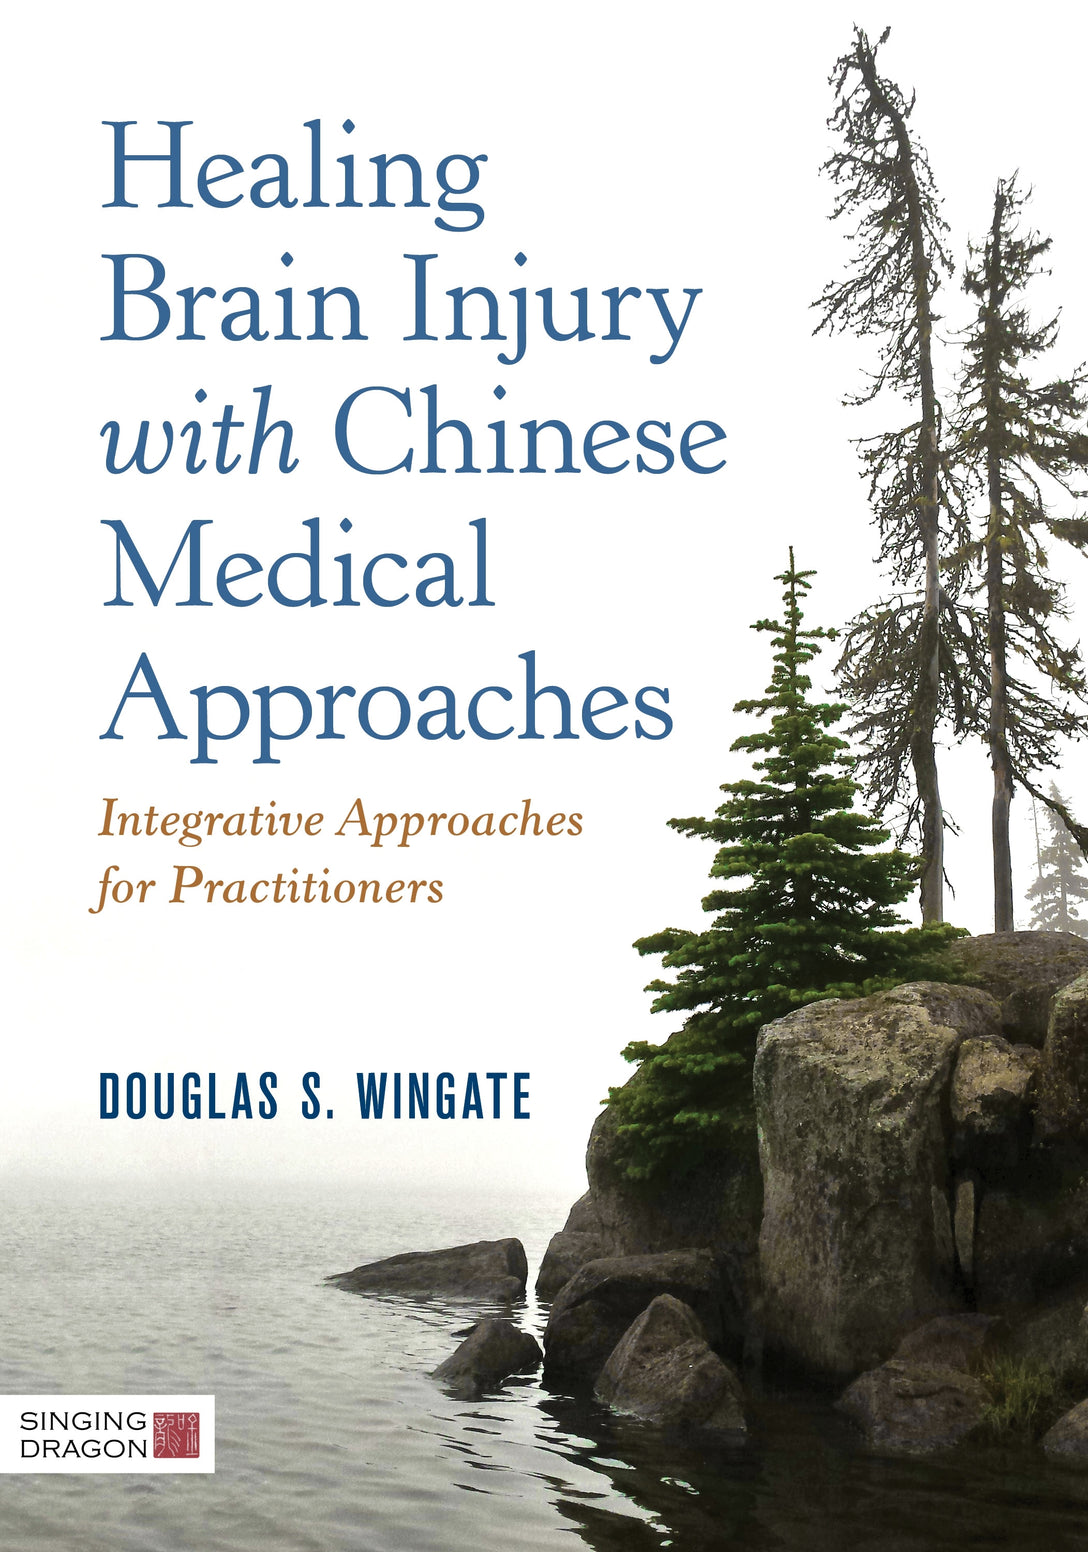 Healing Brain Injury with Chinese Medical Approaches by Douglas S. Wingate